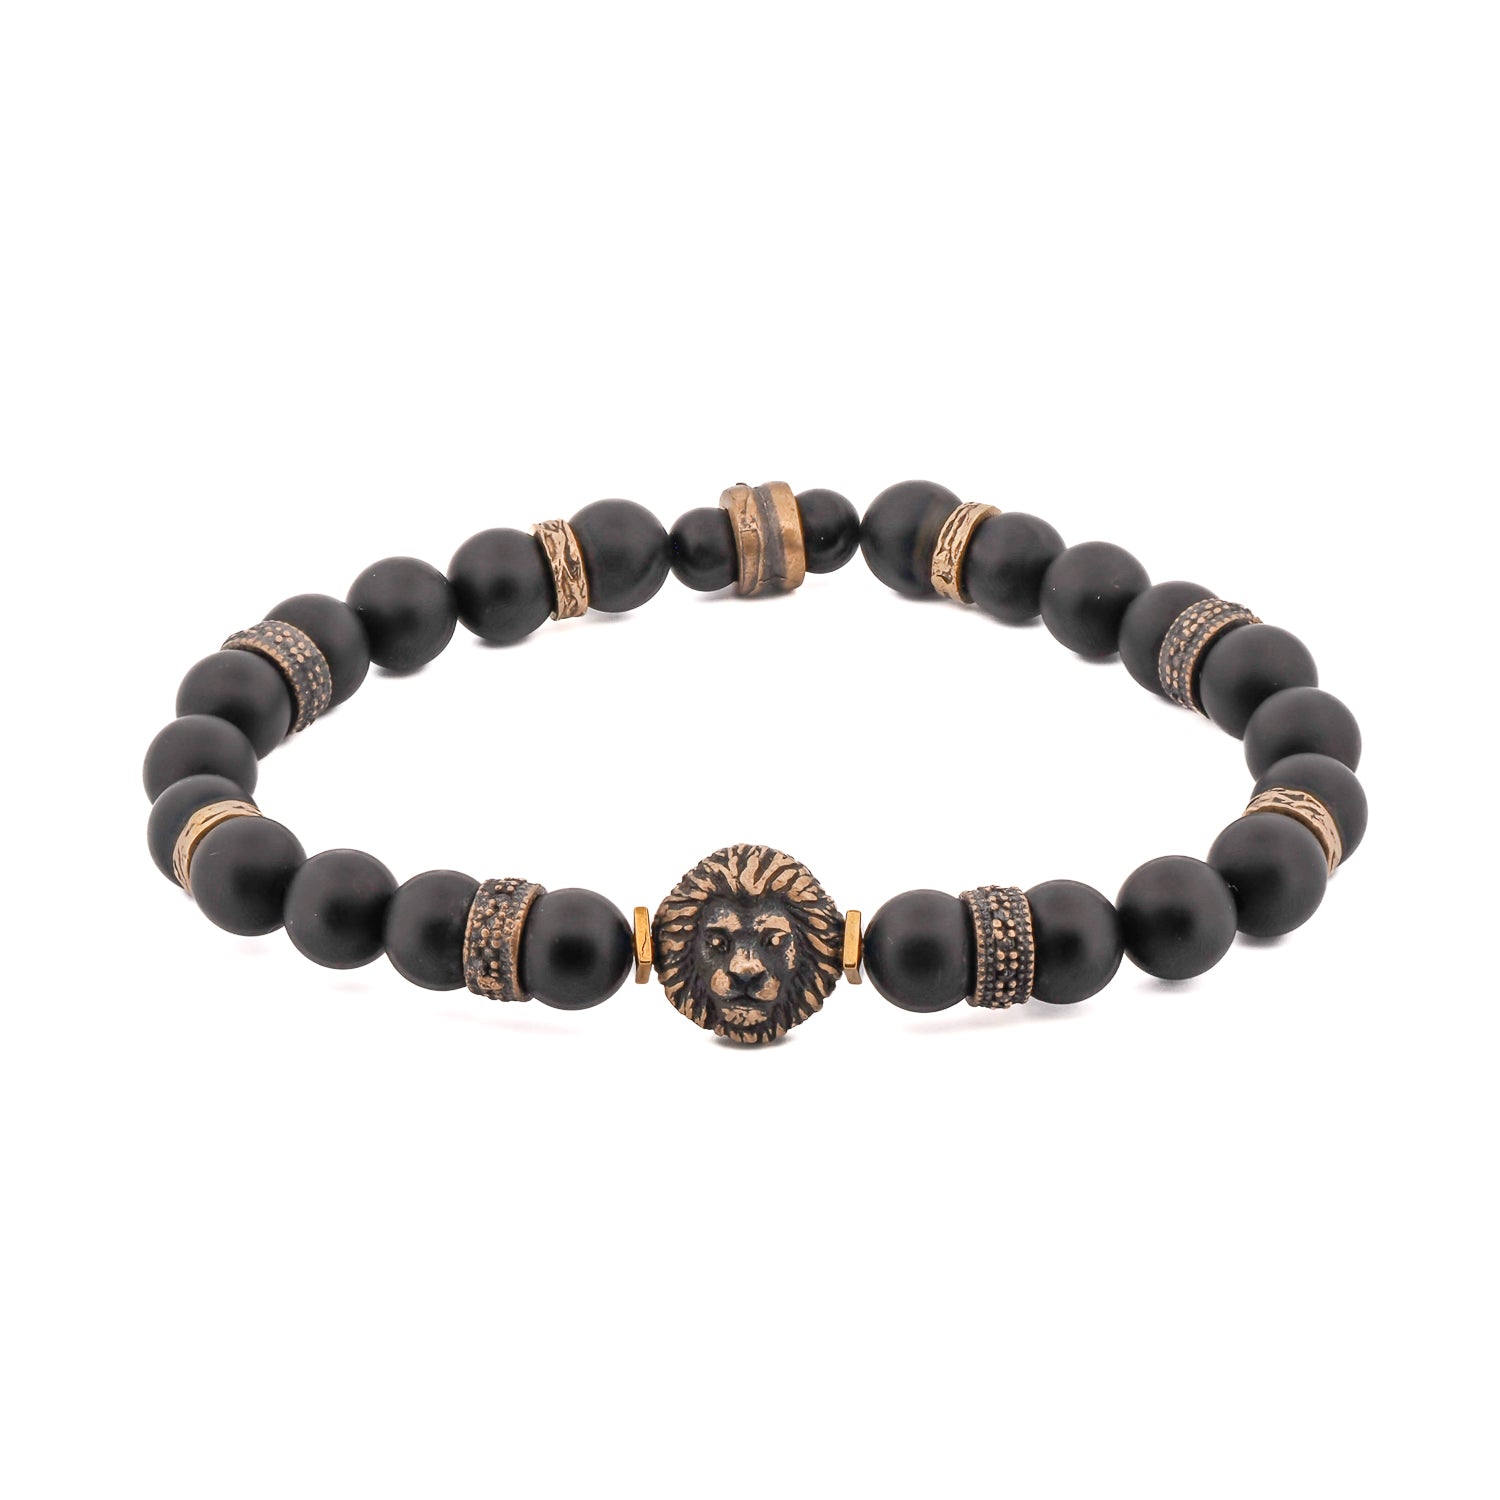 Black Onyx Stone King Lion Beaded Bracelet featuring 8mm matte black onyx beads and a bronze king lion charm